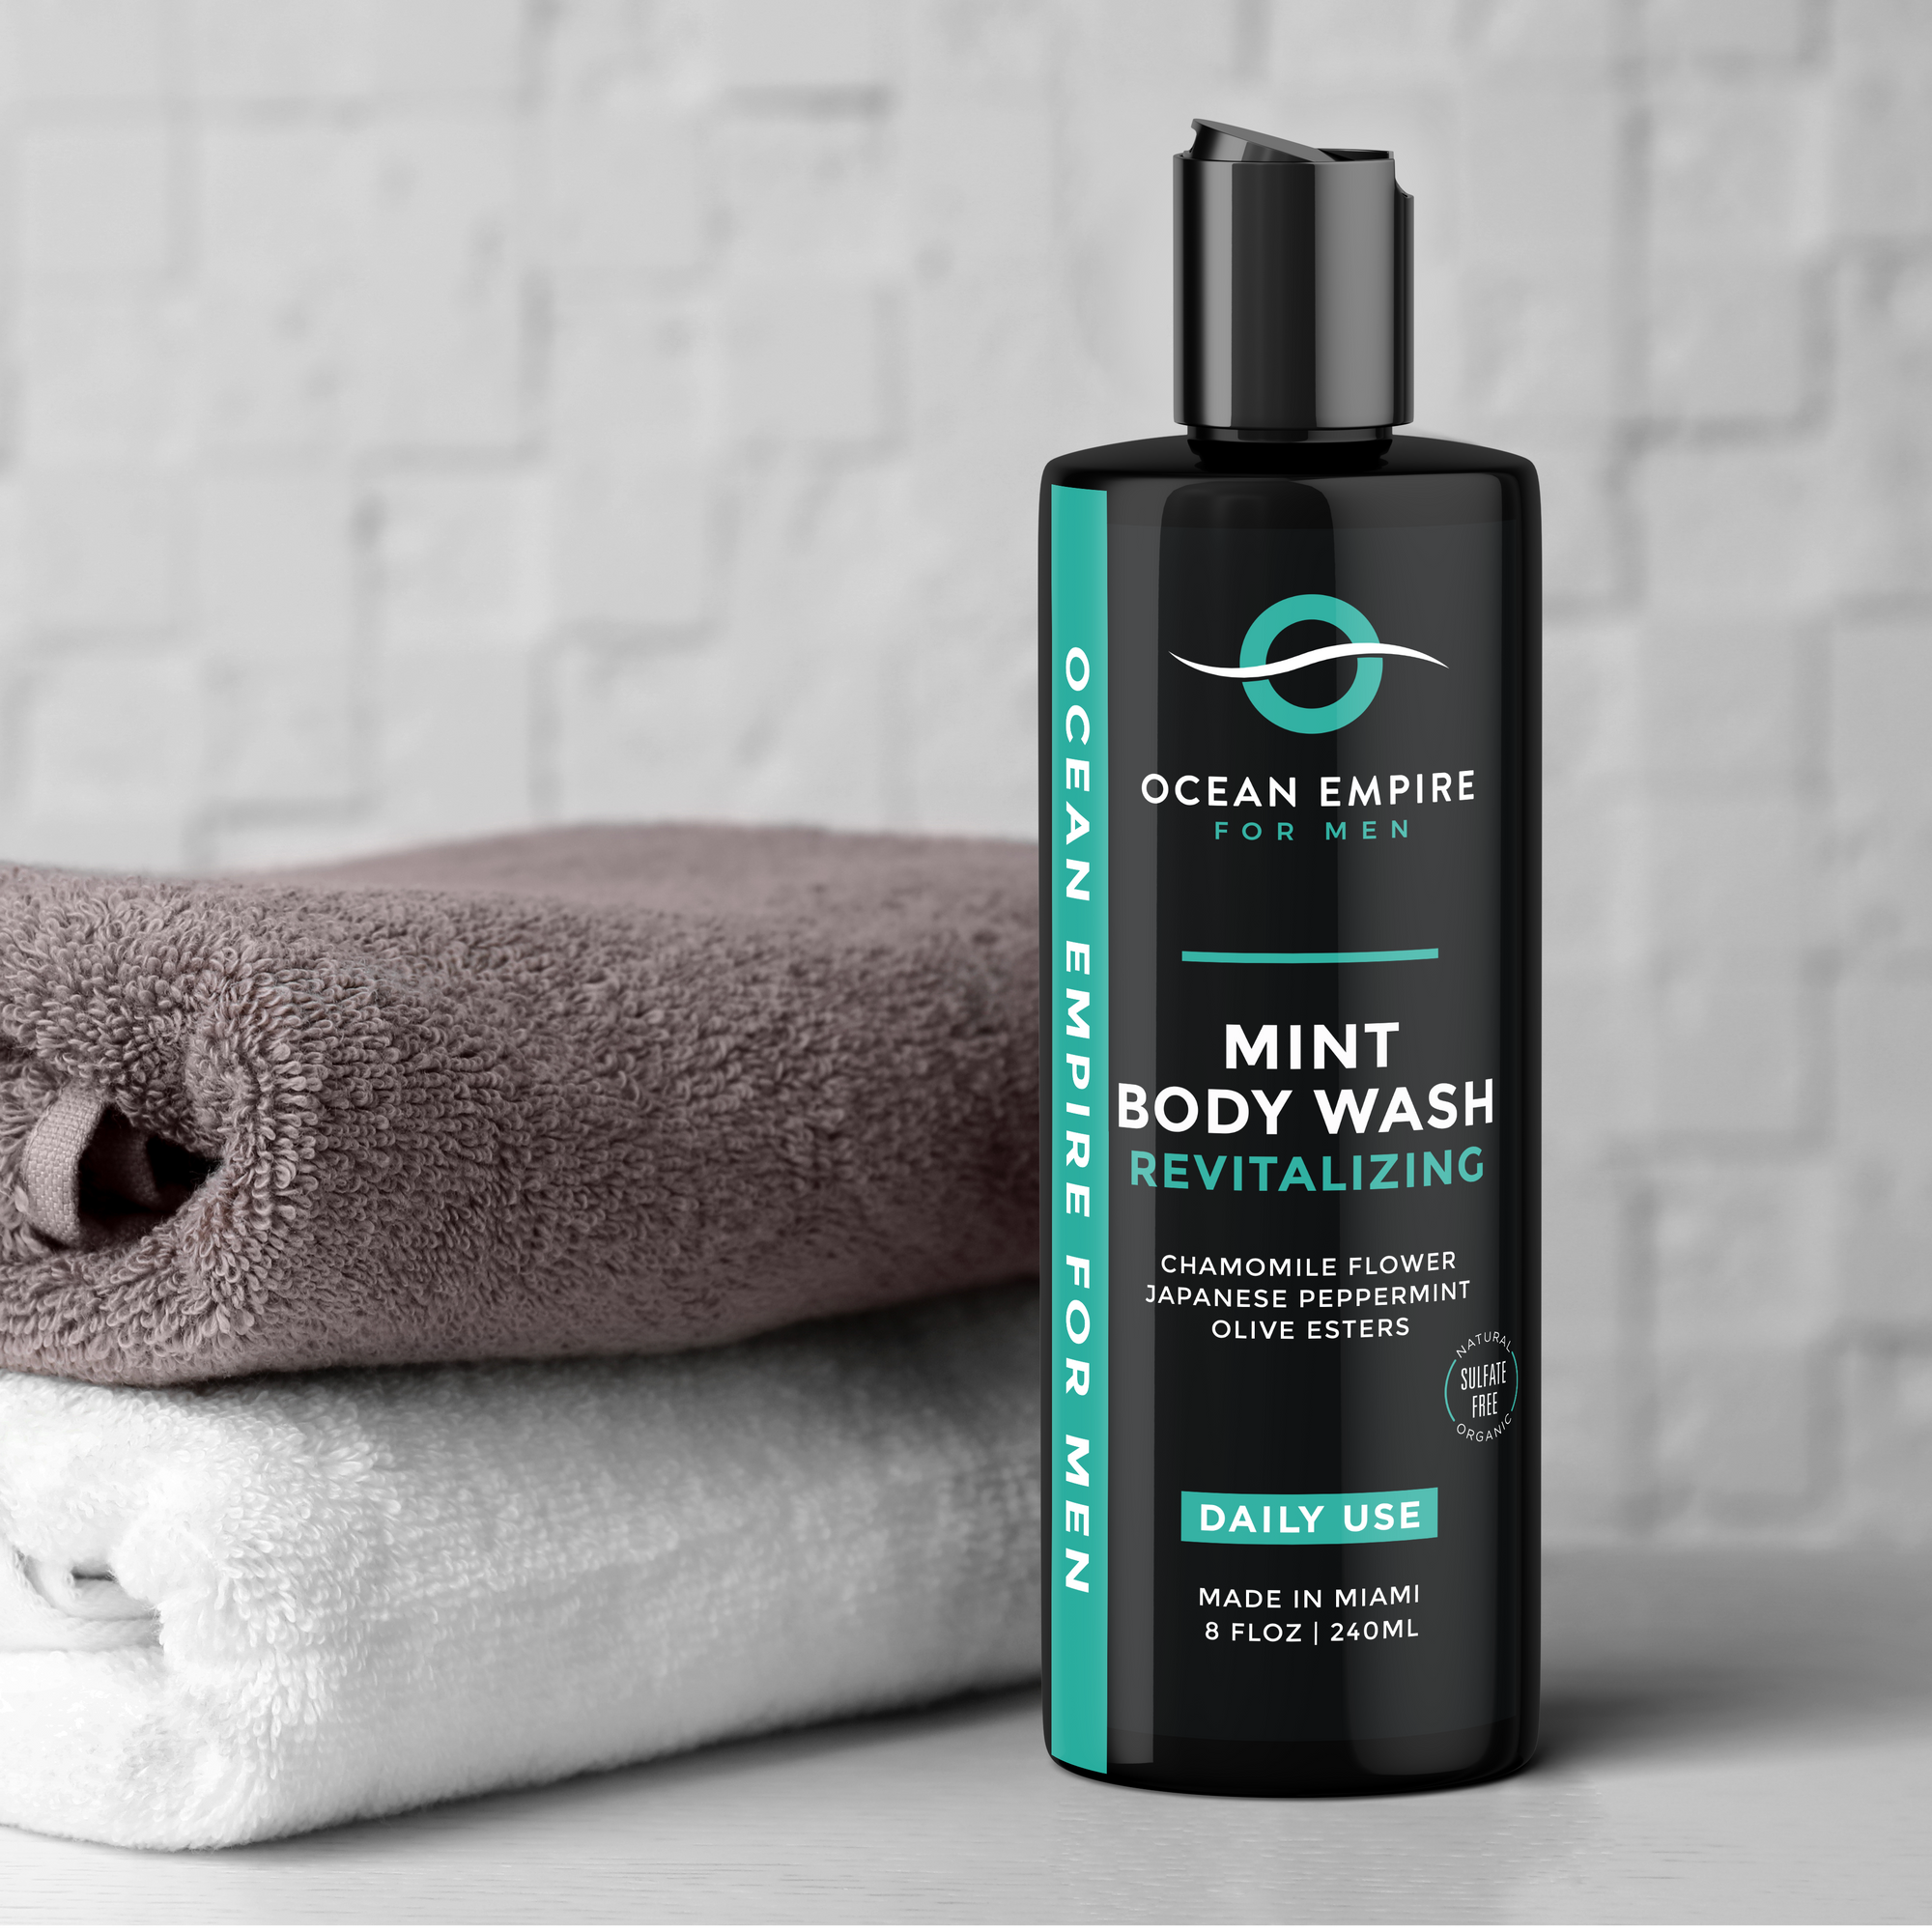 mint body wash shower gel natural ingredients best product for men him hims man revitalizing made in brickell miami skincare products free shipping returns best reviews performing as seen on tv luxury famous daily use paraben free